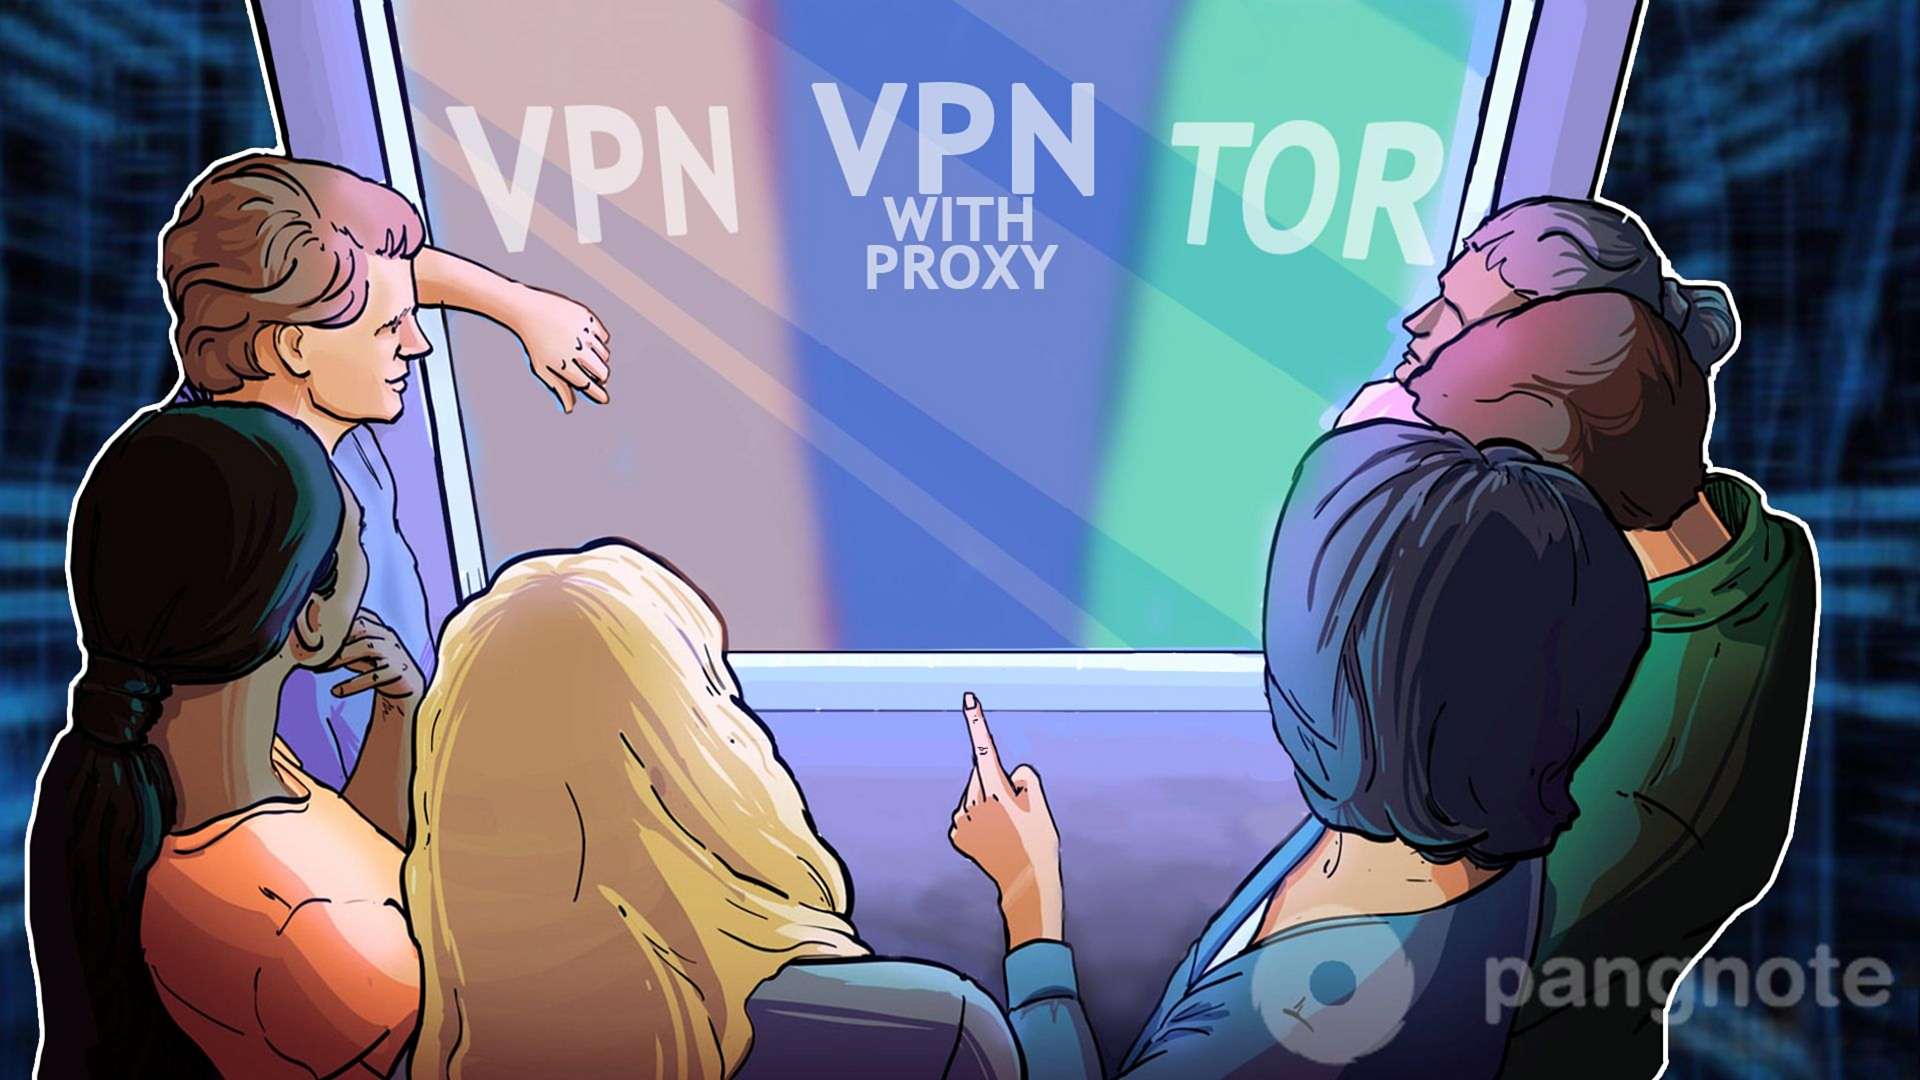 How does it work and VPN comparison VPN with proxy and Thor?